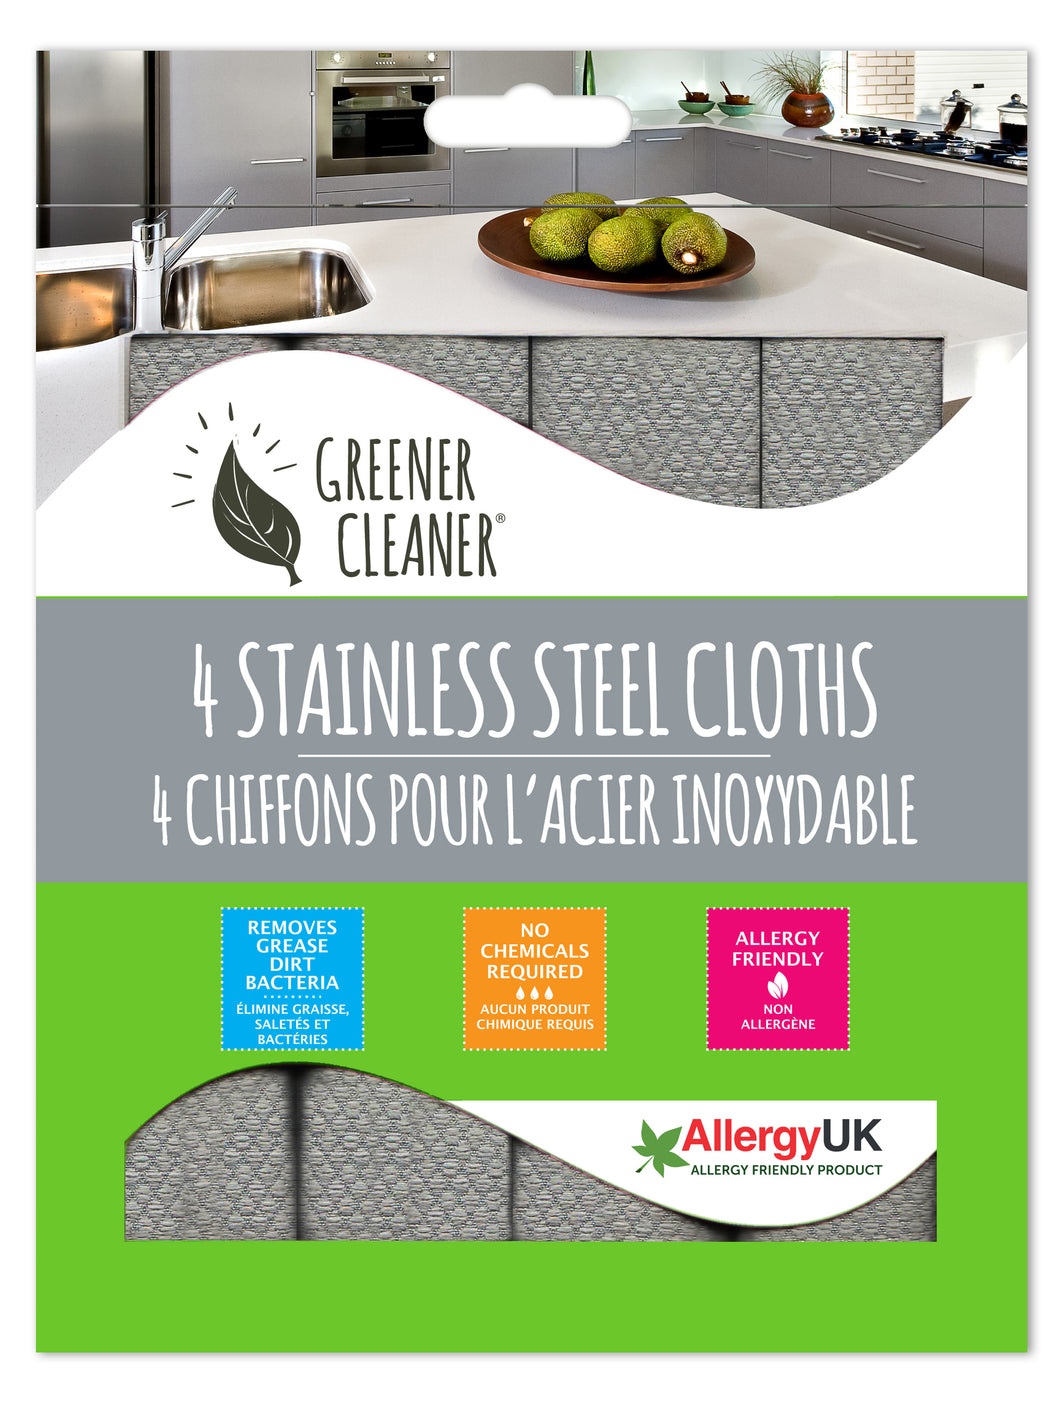 4 Stainless Steel Cloths